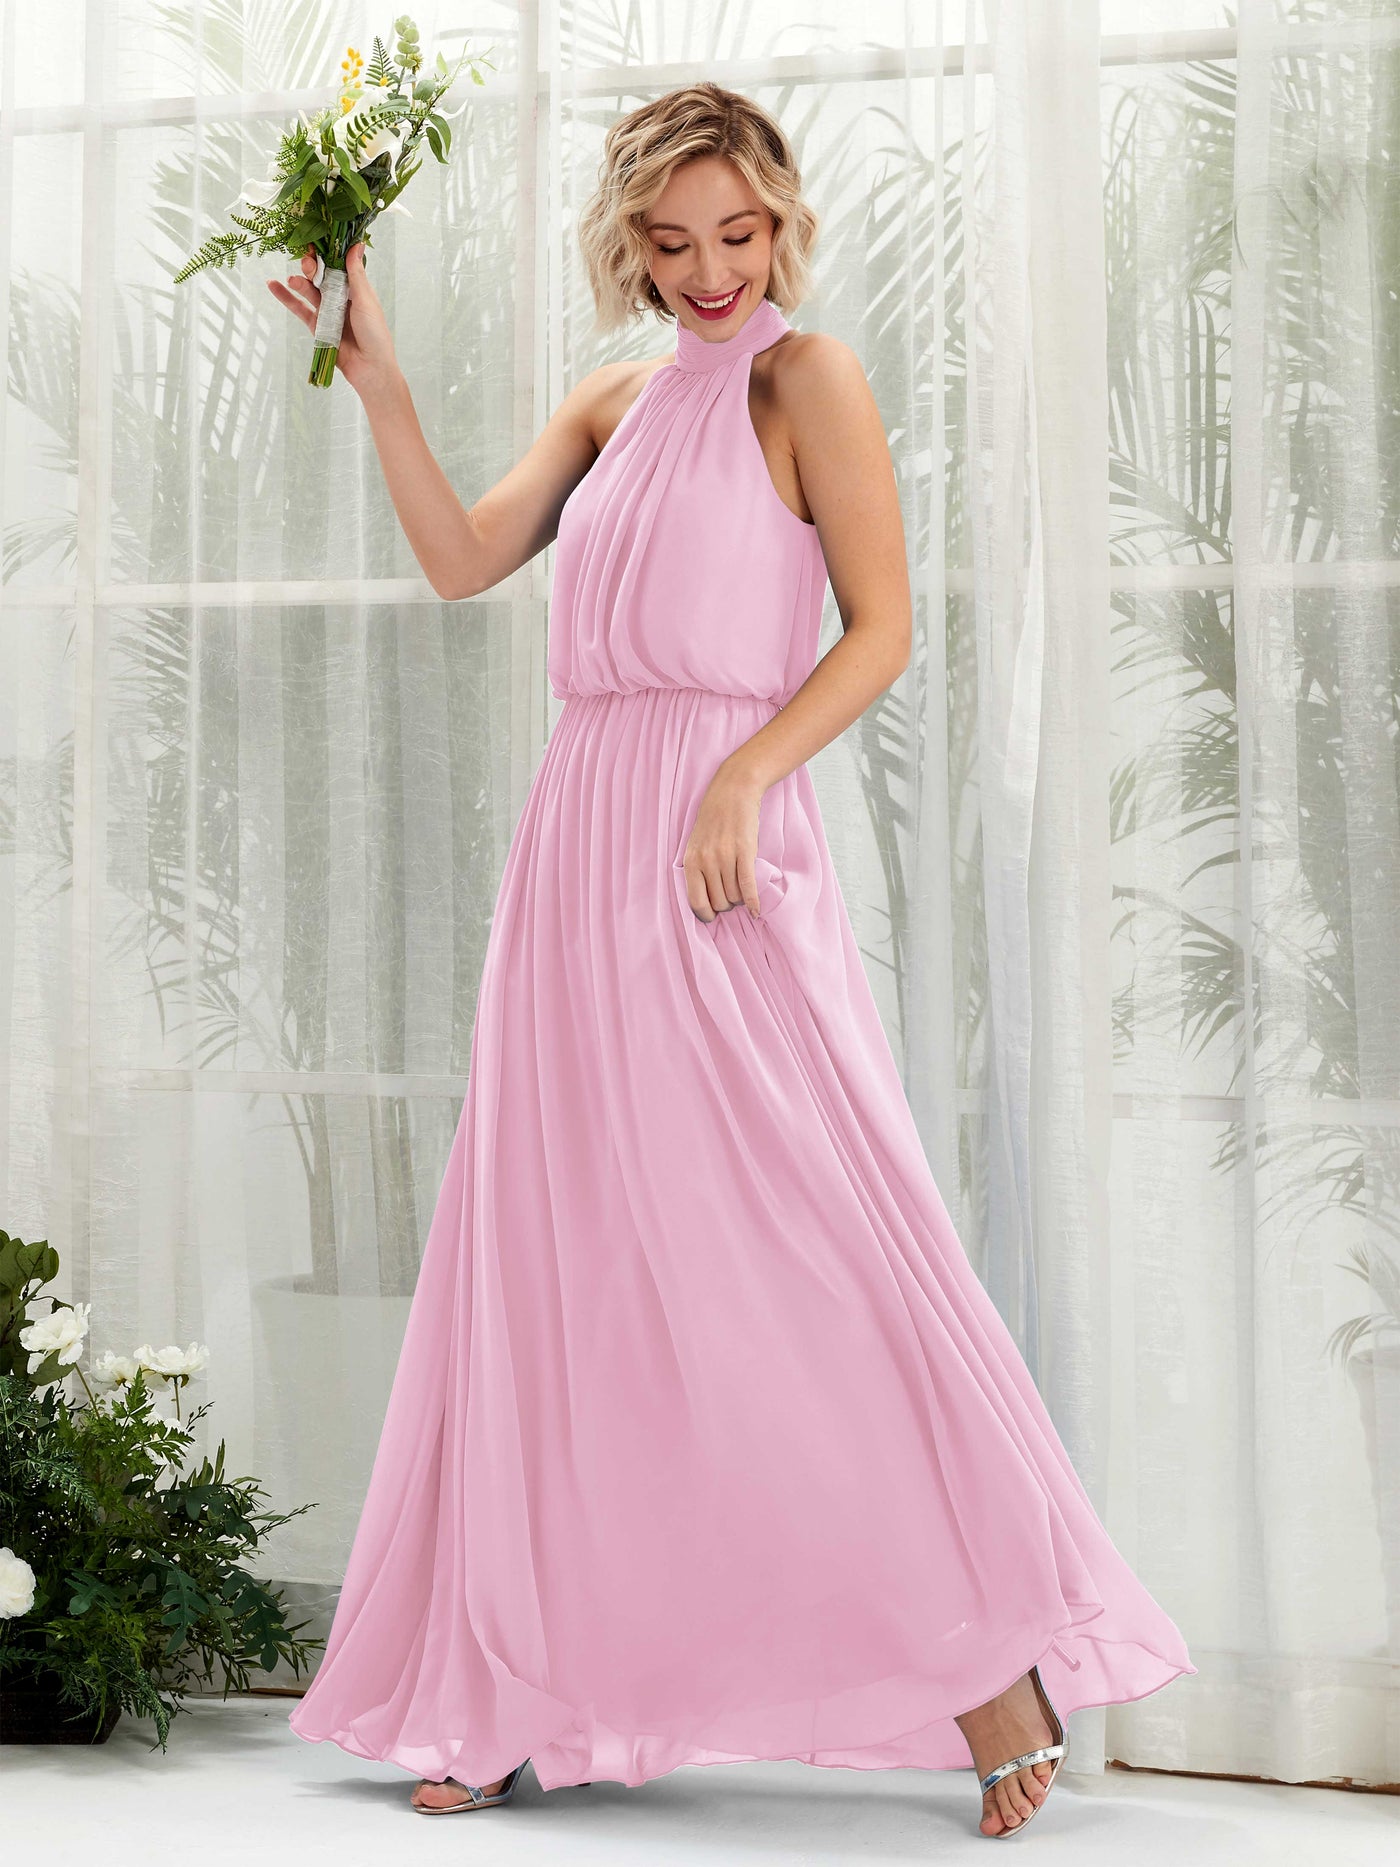 Candy Pink Bridesmaid Dresses Bridesmaid Dress A-line Chiffon Halter Full Length Sleeveless Wedding Party Dress (81222939)#color_candy-pink